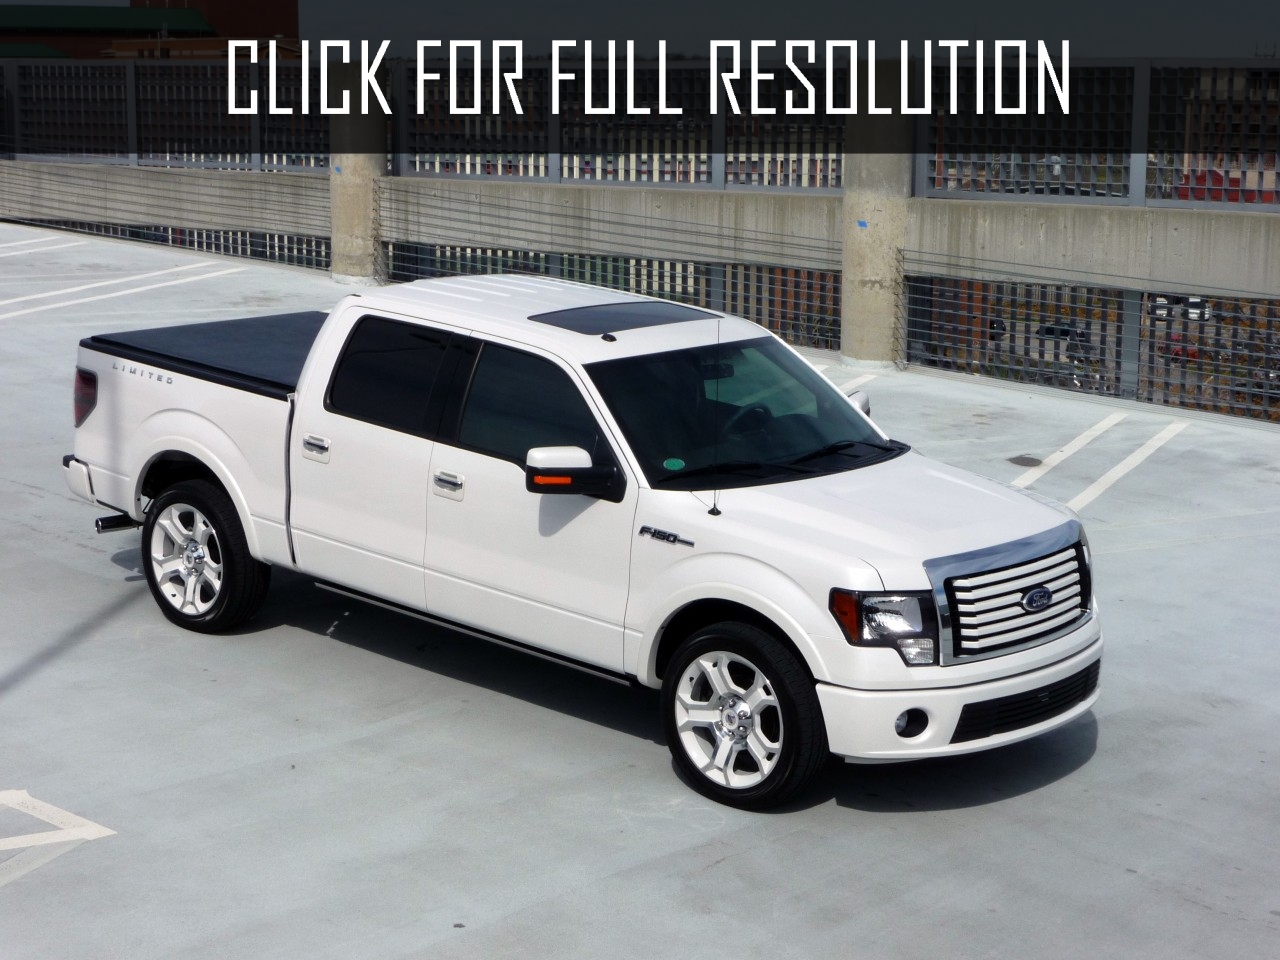 2011 Ford F-150 Limited